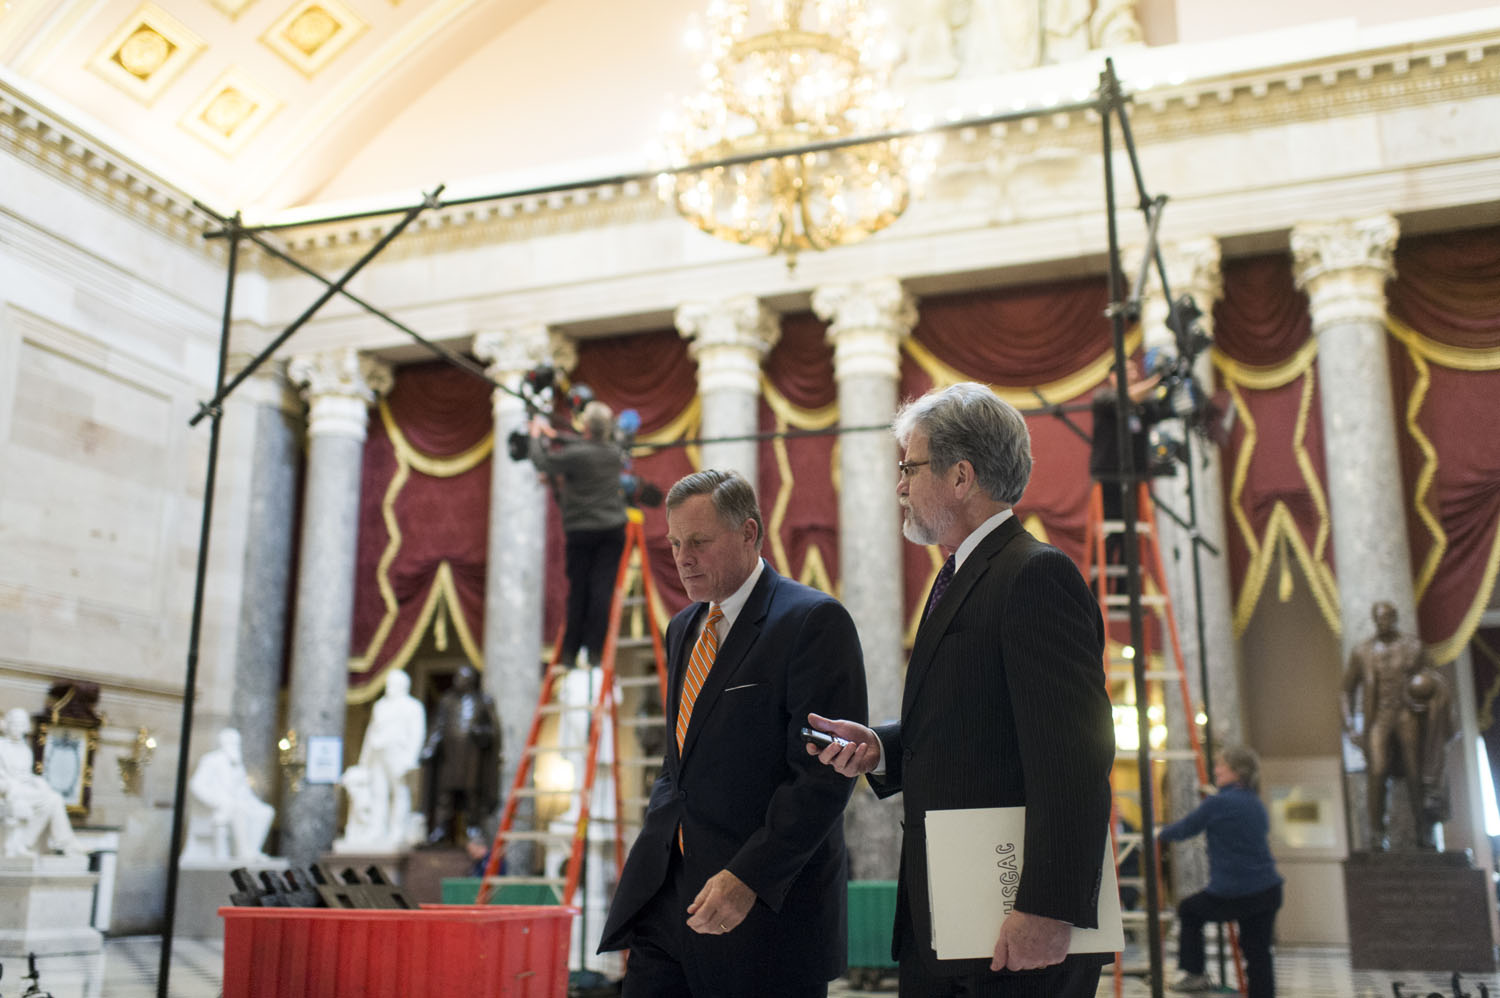 From left: Senator Richard Burr and Senator Tom Coburn walk through Statuary Hall in the Capitol ahead of the State of the Union on Jan. 28, 2014 in Washington, D.C. (Bill Clark&mdash;CQ-Roll Call/Getty Images)